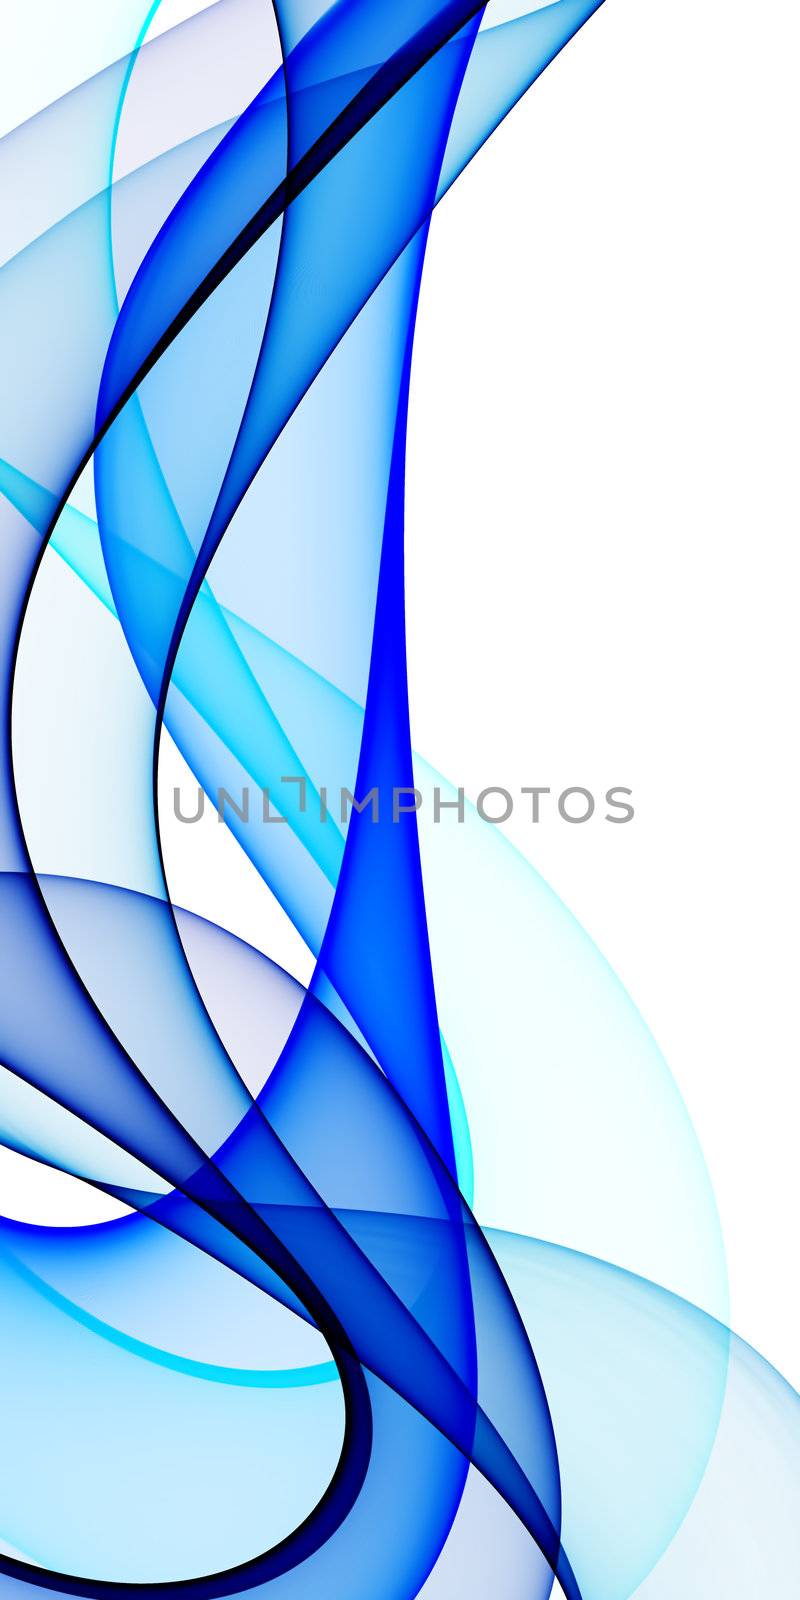 Smooth waves from blue tones on a white background